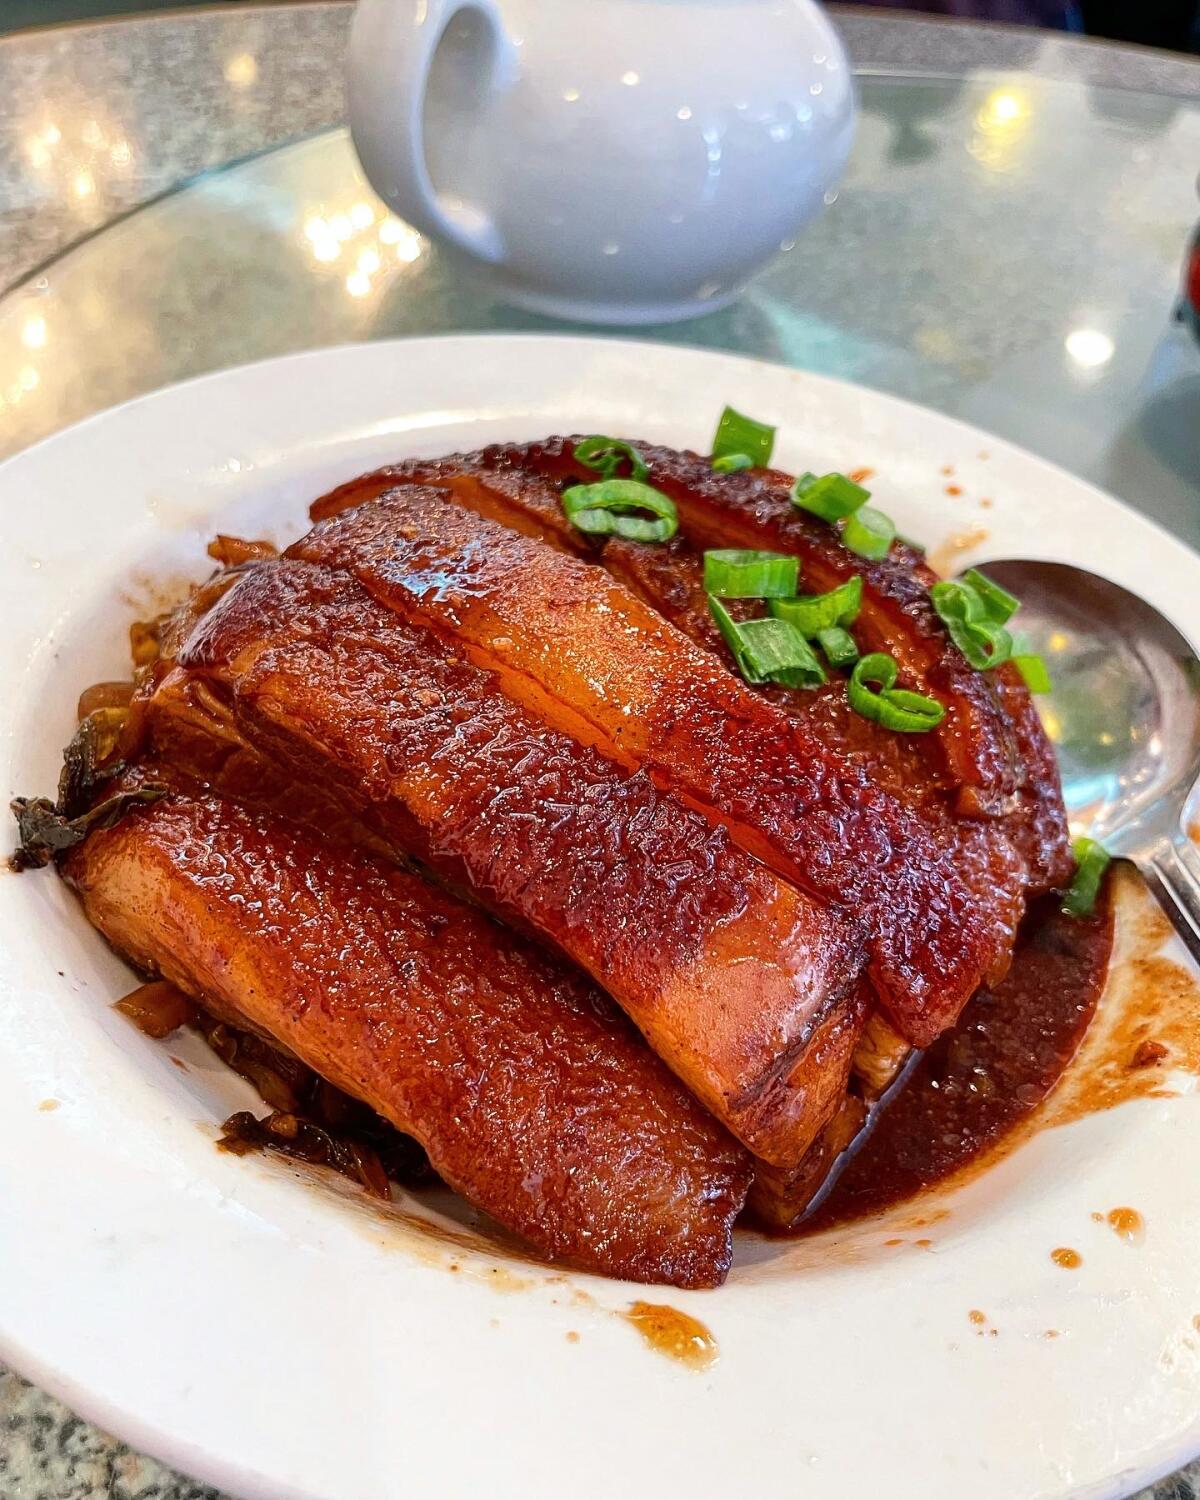 Pork belly topped with green onions.